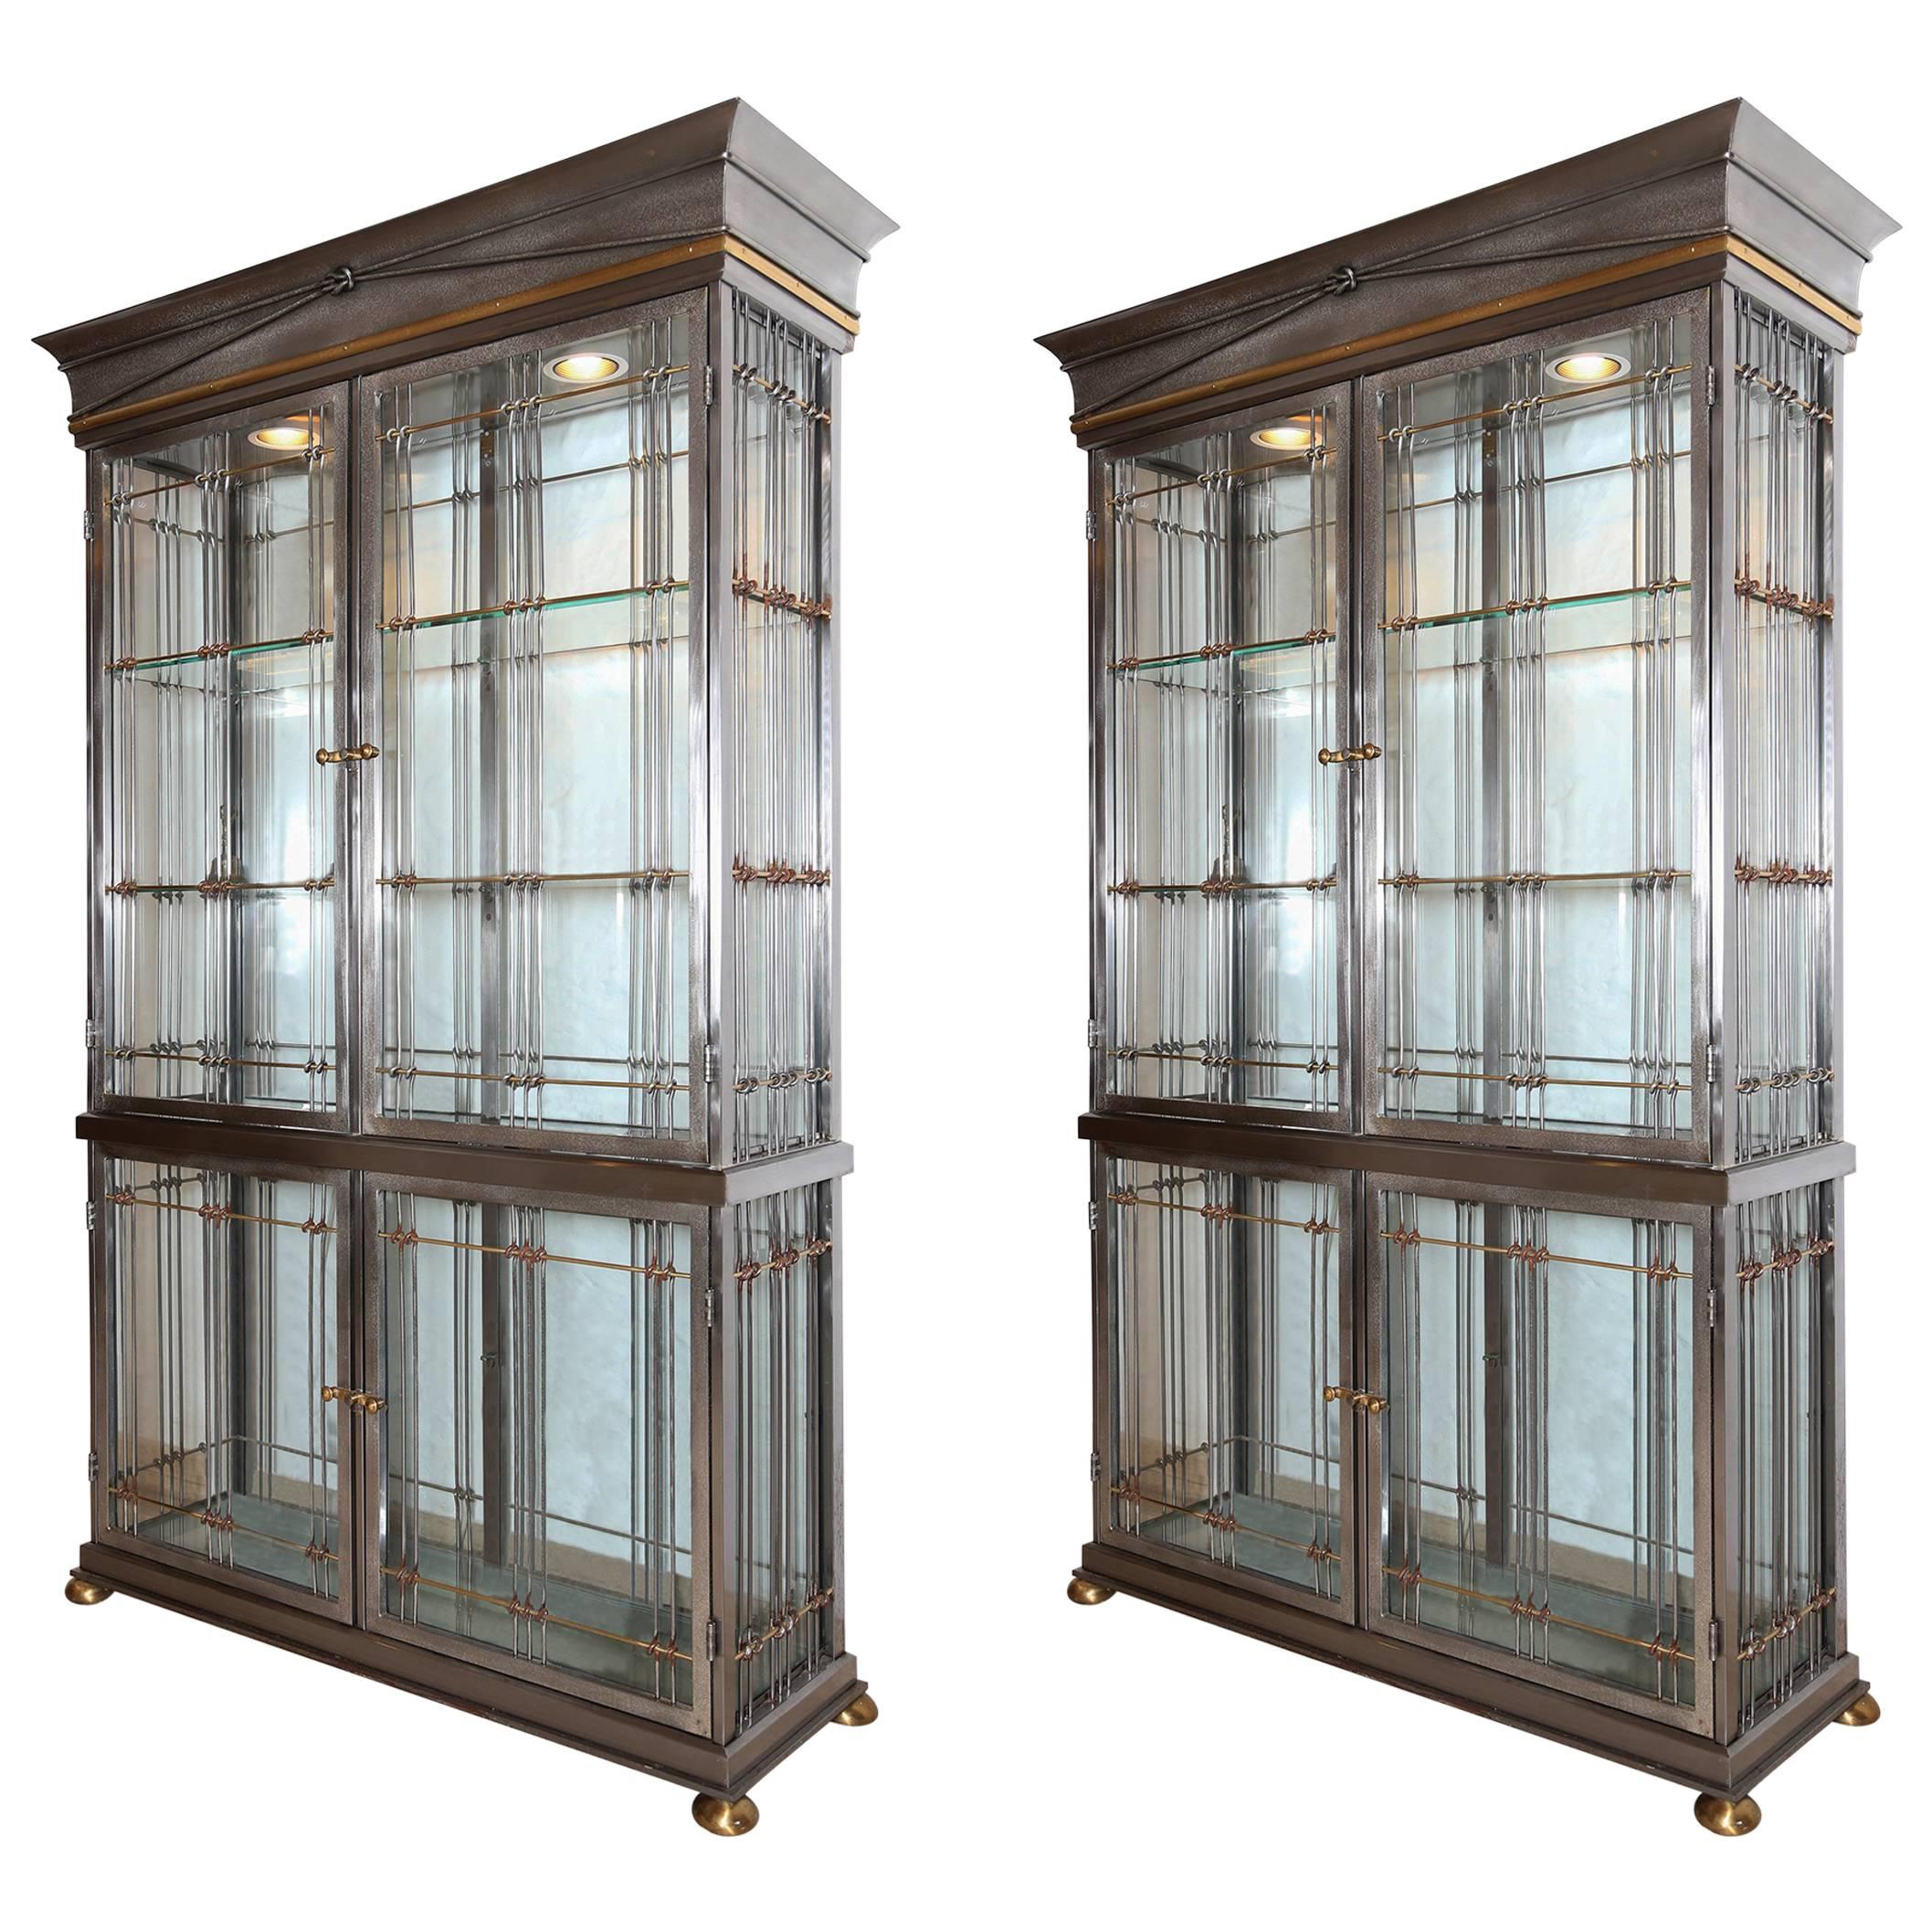 Pair of Display Cabinets by Maison Jansen